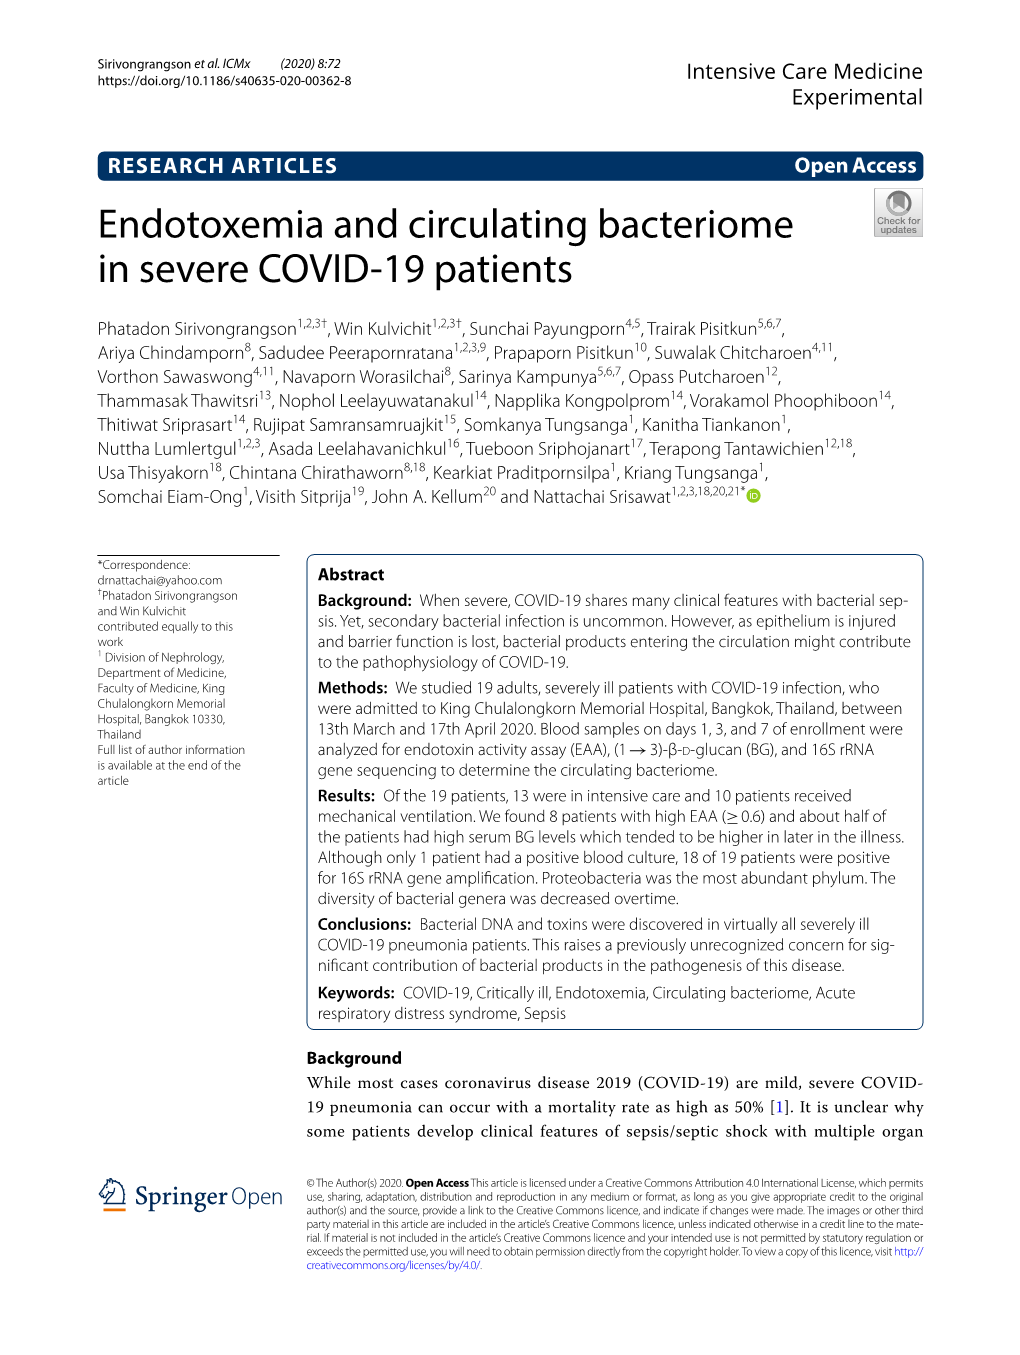 Endotoxemia and Circulating Bacteriome in Severe COVID-19